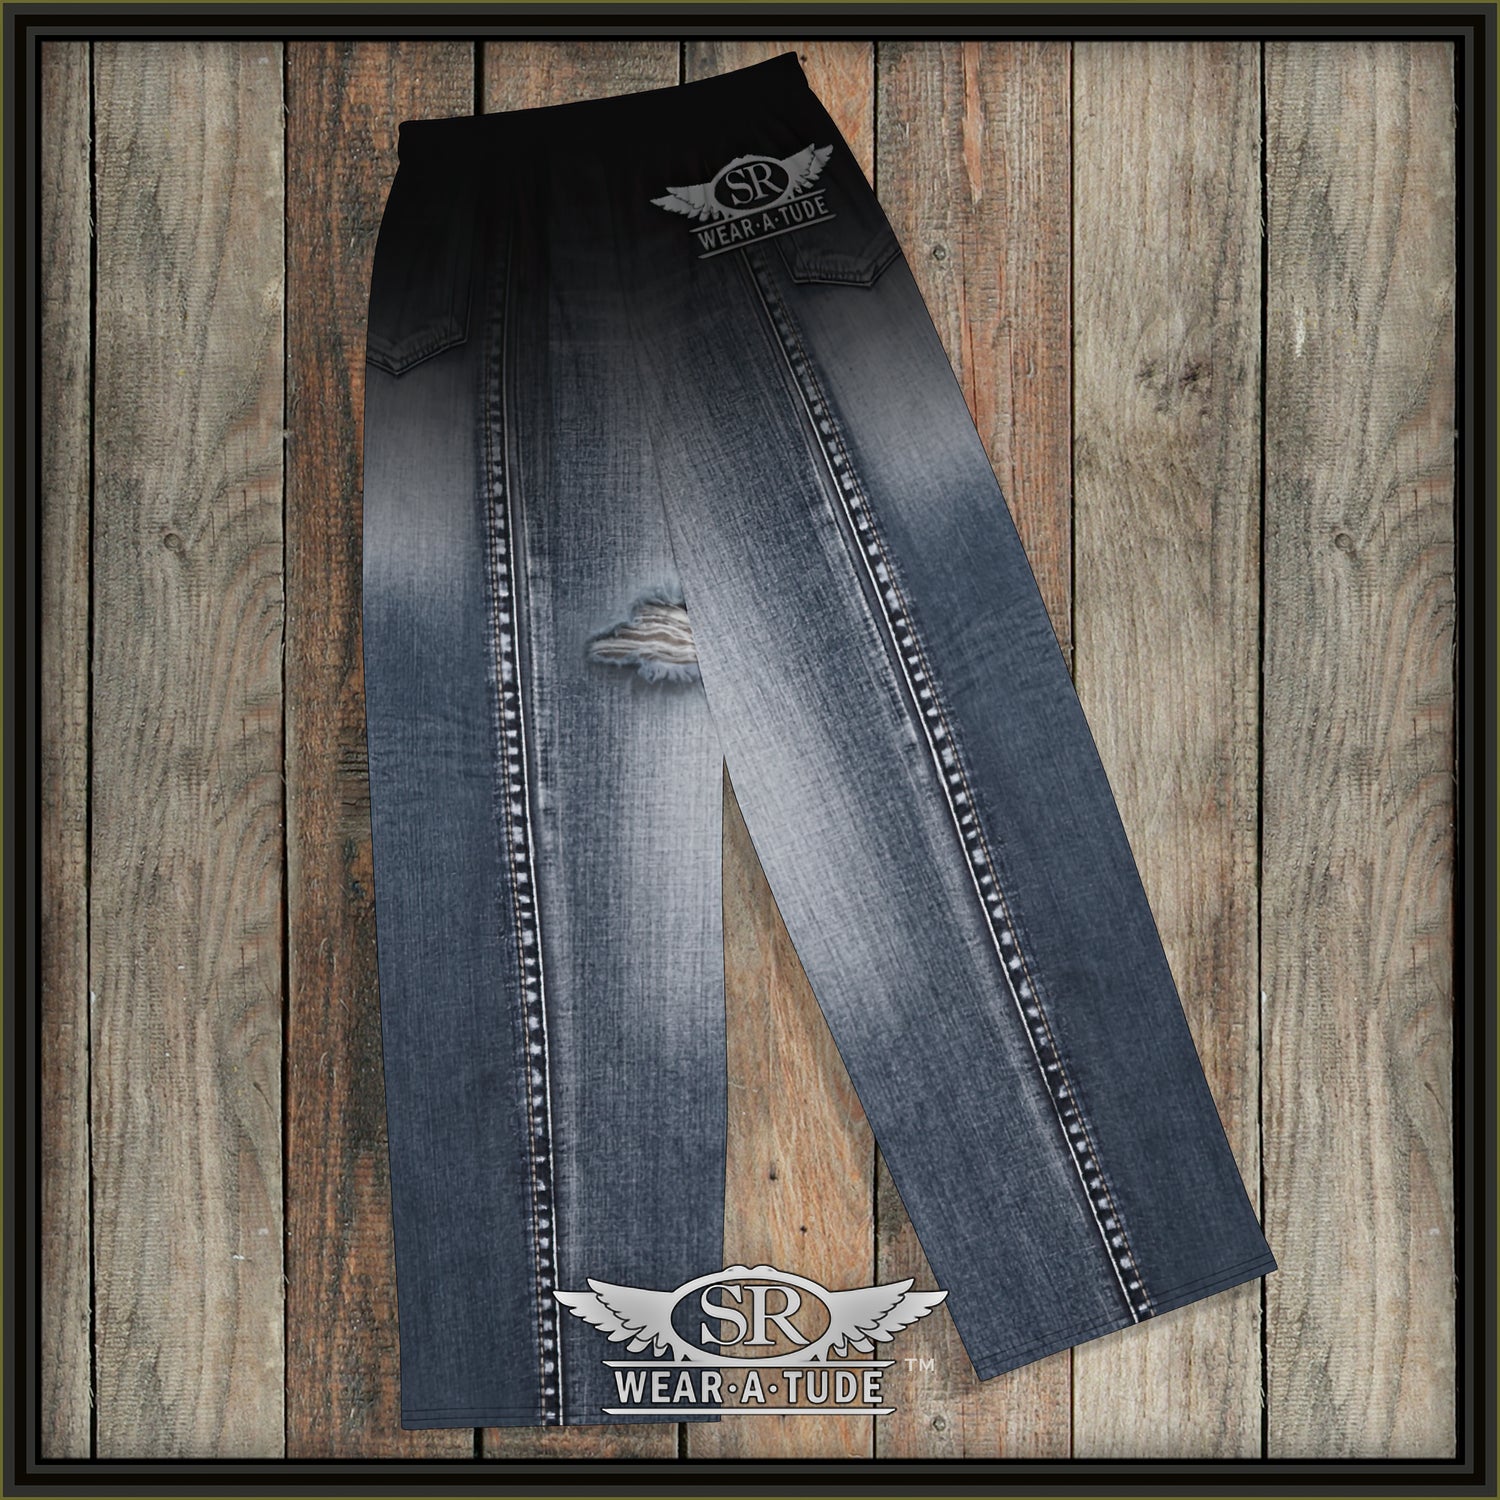 Faux ripped jean look on your comfy clothes. Get the comfort of lounge-wear in this stylish pair of wide-leg pants. With the adjustable waist and stretchy fabric, they are casual enough just to hang out at home, but dressed up with the right shirt and jacket these can be for going out and jamming at your buddies place. 